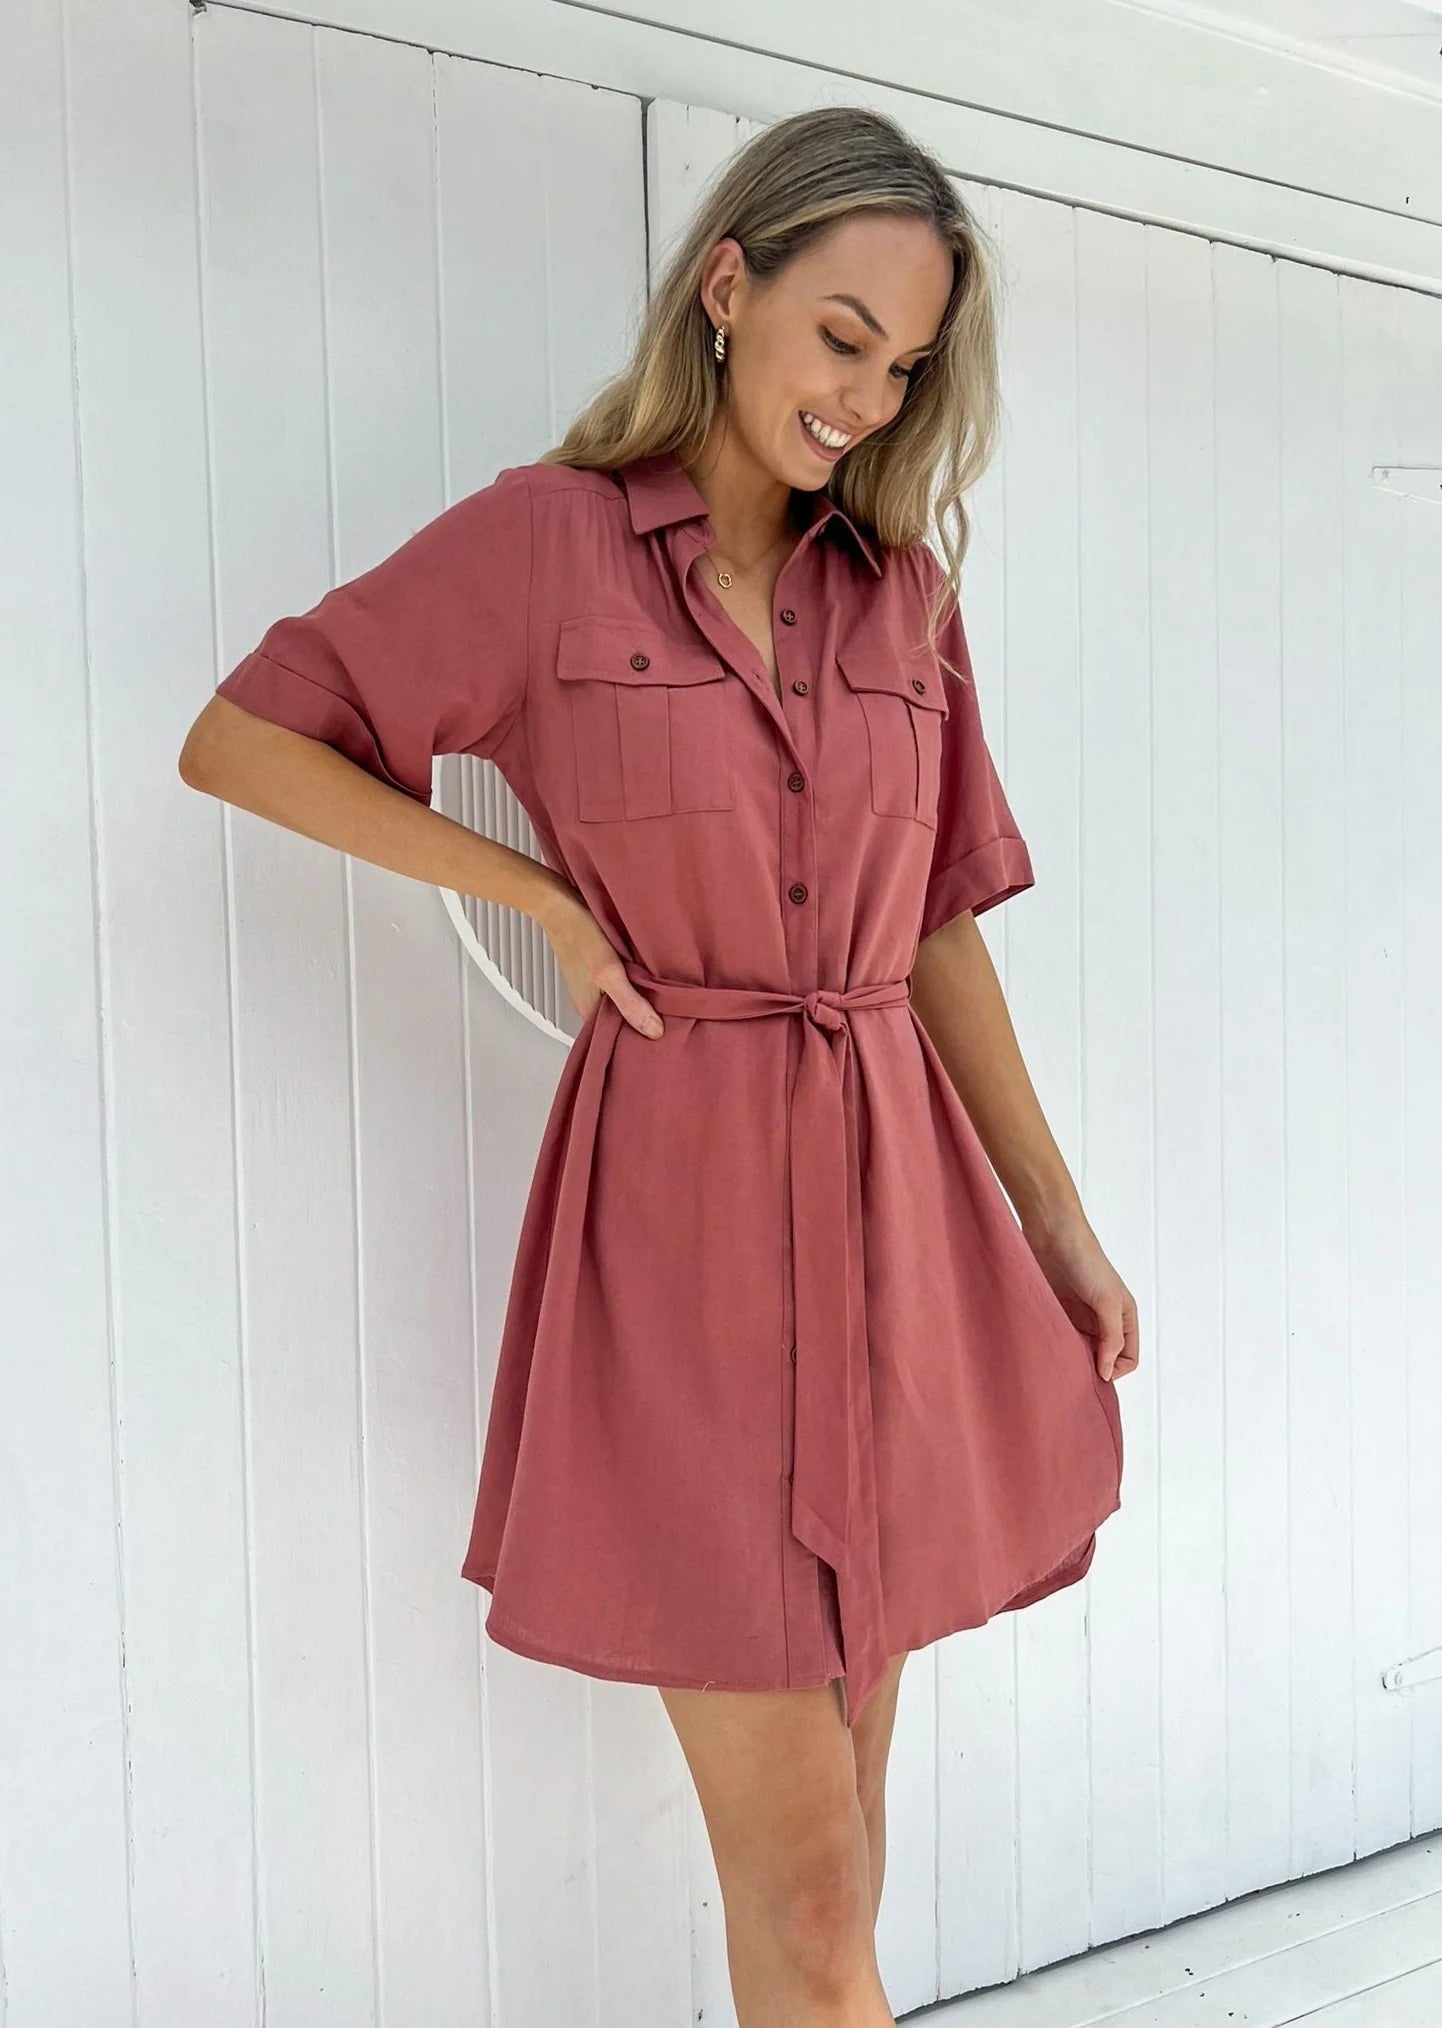 Aspen Dress: 
The Aspen Dress is a versatile shirt dress made from 100% cotton. With a matching belt and convenient pockets, this short dress features a chic high-low hem and is  - Ciao Bella Dresses - Mylk the Label